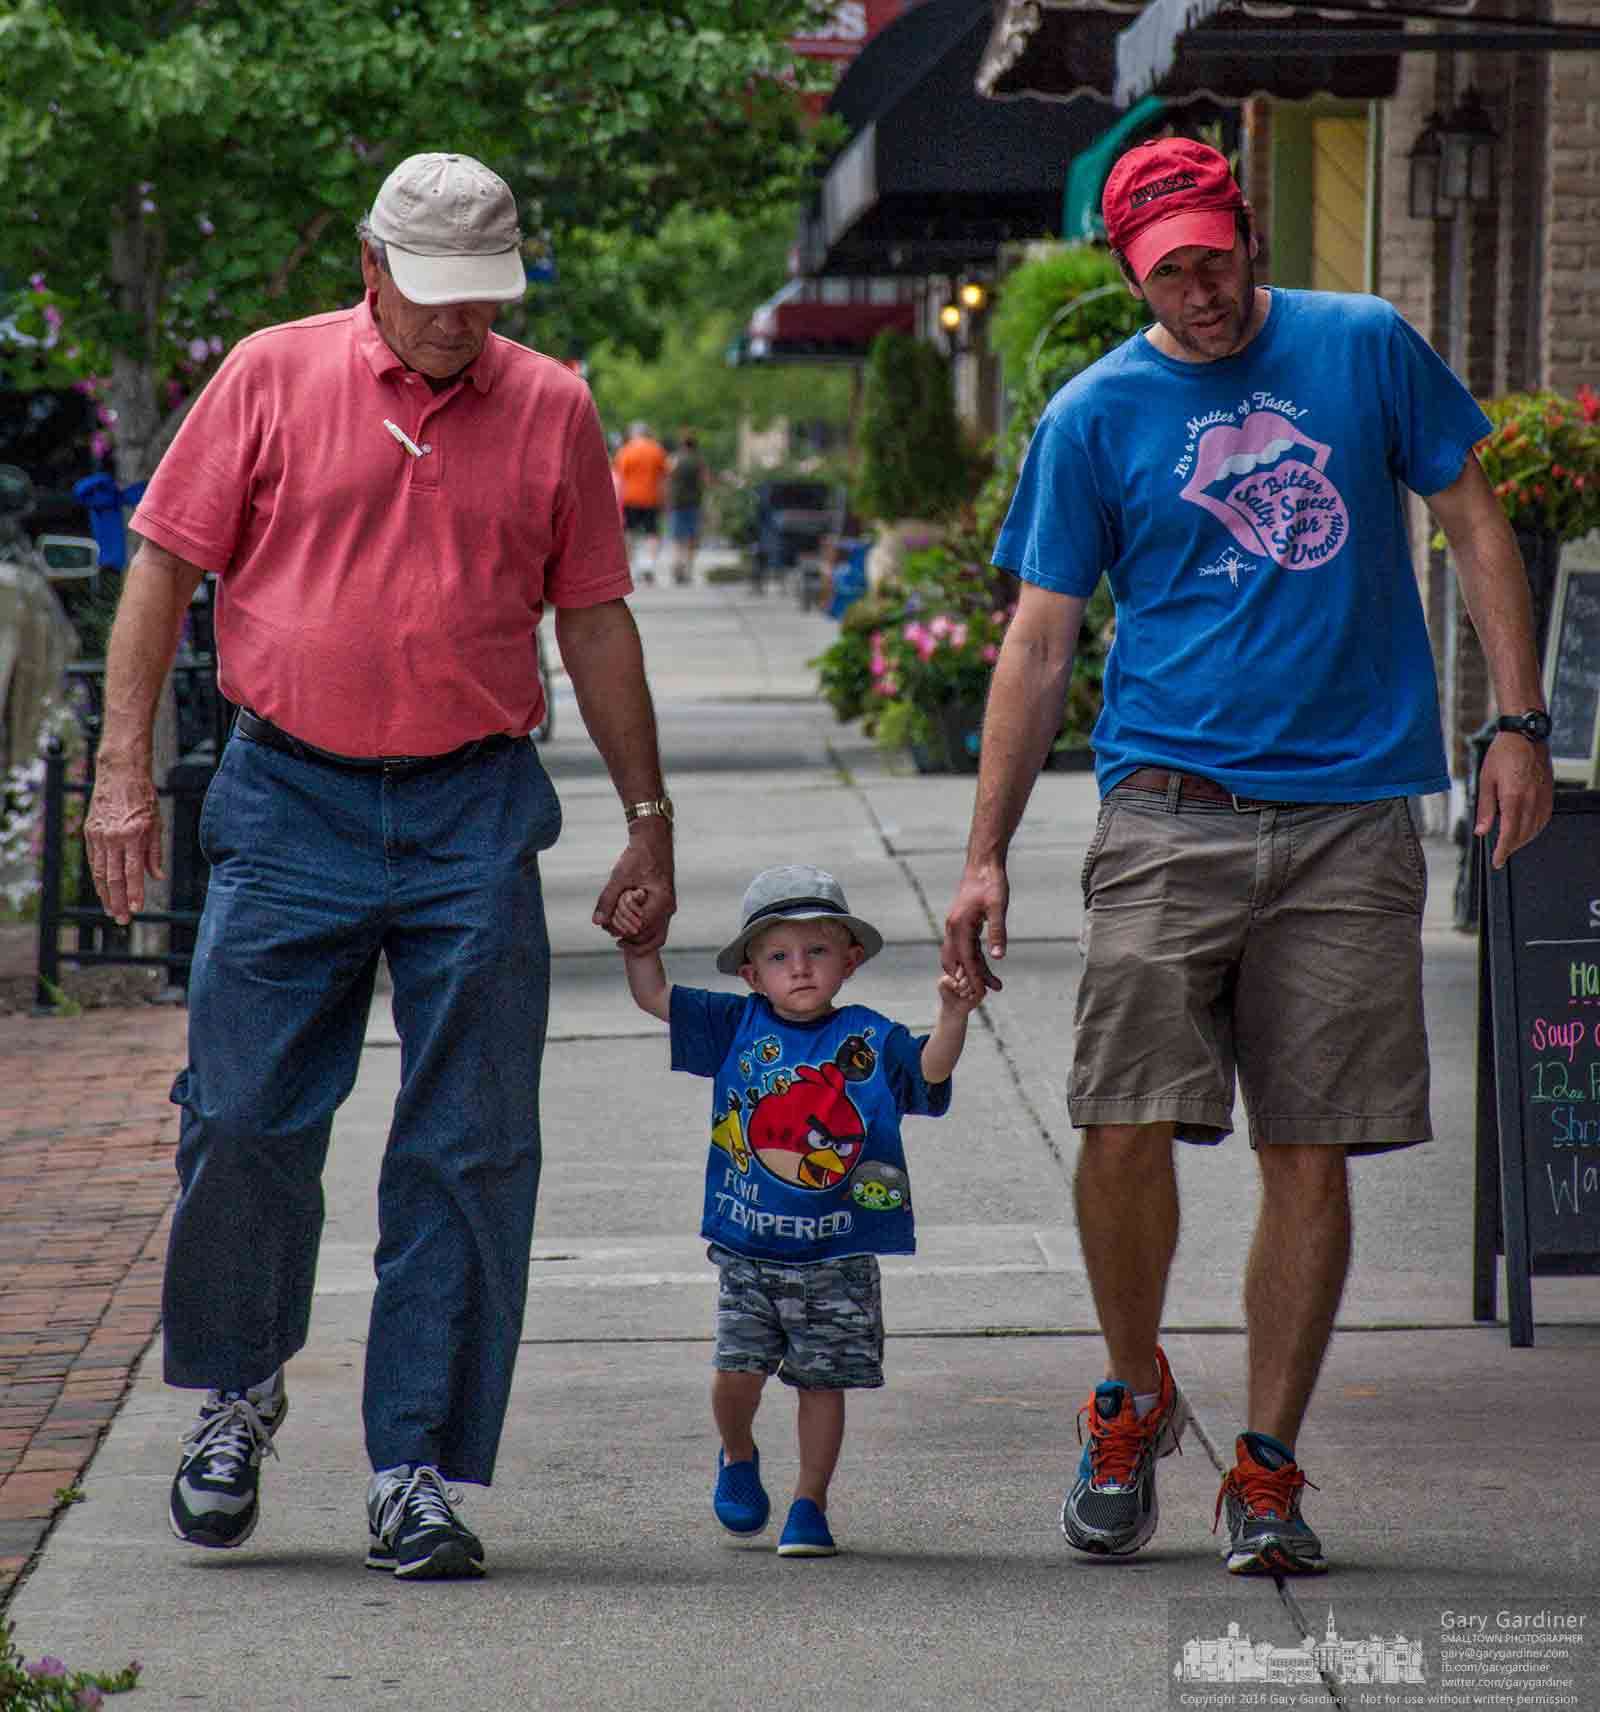 Grandfather, father, and son, all wearing hats against the afternoon heat, hold hands walking down the sidewalk in Uptown Westerville Friday. My Final Photo for August 12, 2016.